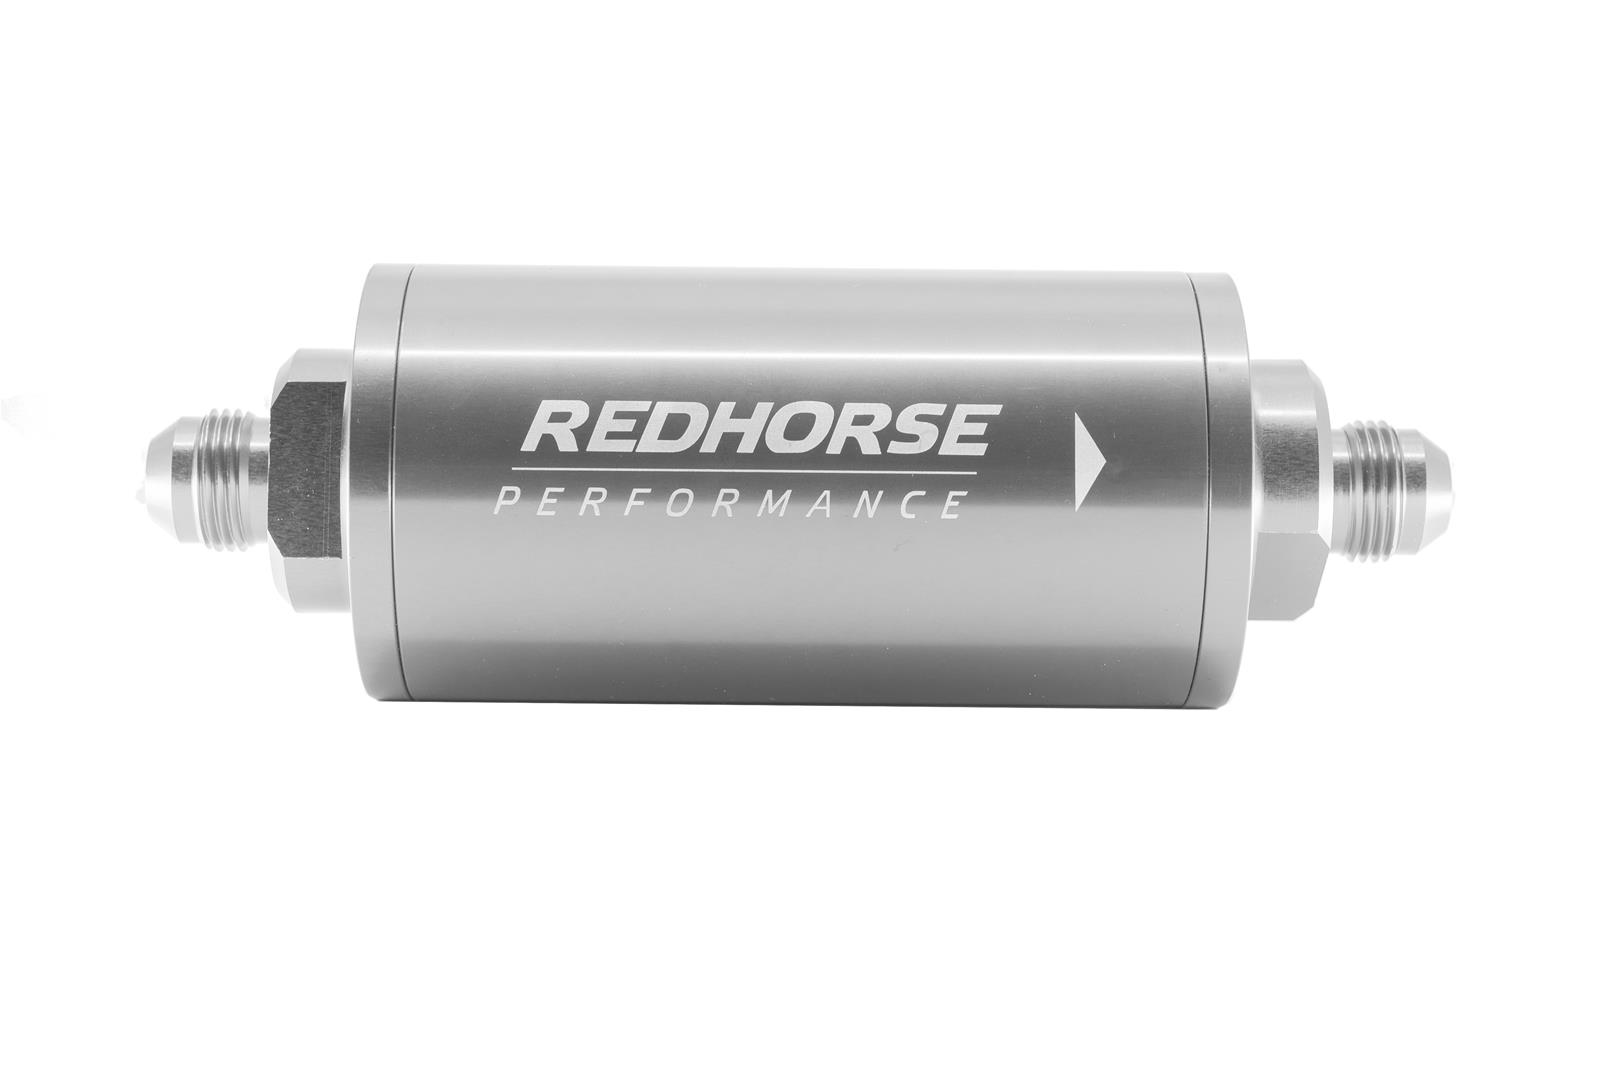 Redhorse Performance 4651-08-5-12 6in Cylindrical In-Line Race Fuel Filter w/ 12 Micron Fiberglass element - 08 AN